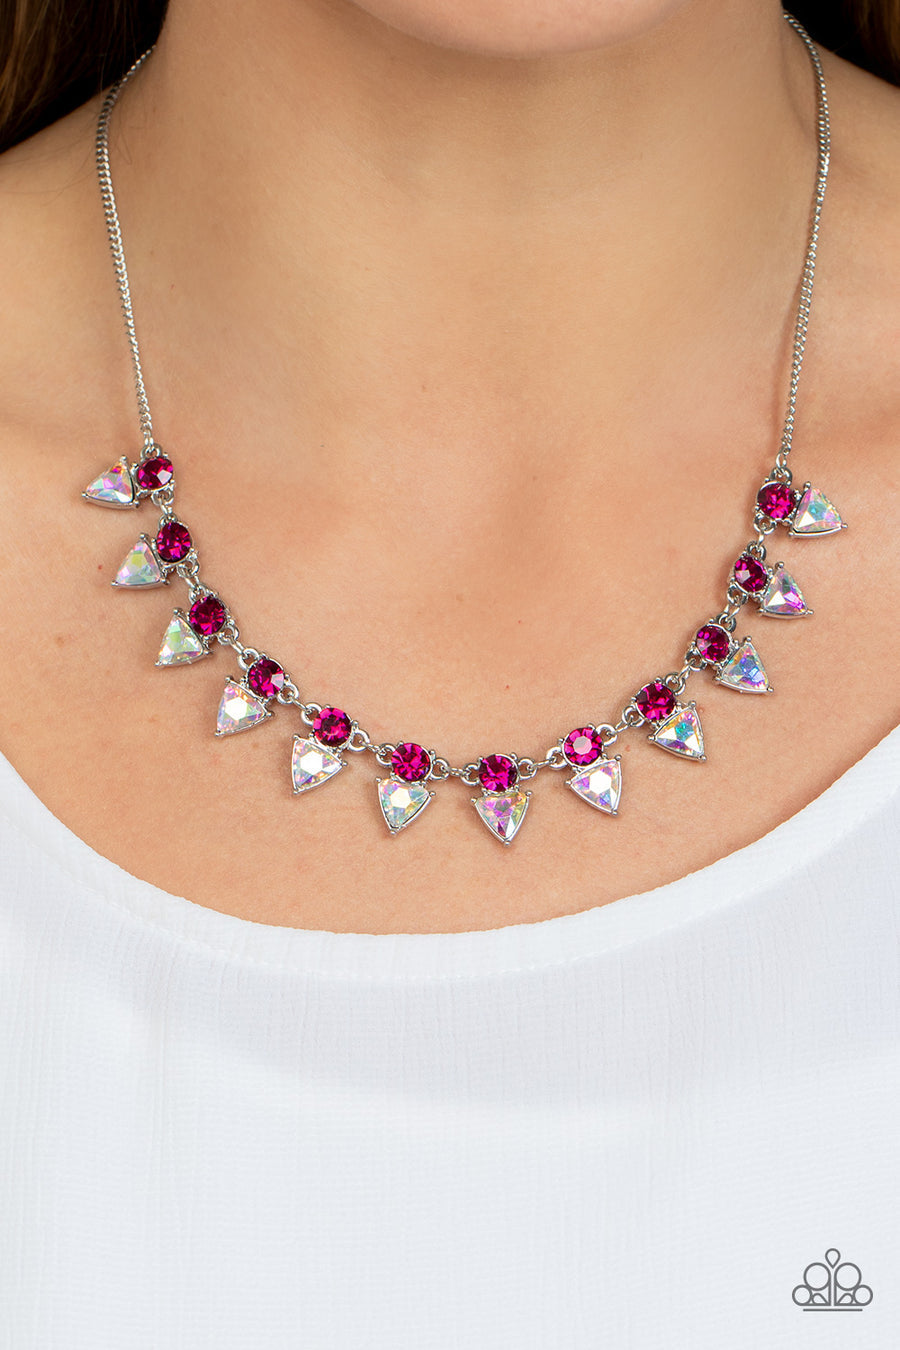 Razor-Sharp Refinement - Pink Iridescent and Silver Necklace - Paparazzi Accessories - Solitaire pink rhinestones sparkle atop iridescent prism-like gems below the collar, linking into a sharp-looking statement piece. Features an adjustable clasp closure.